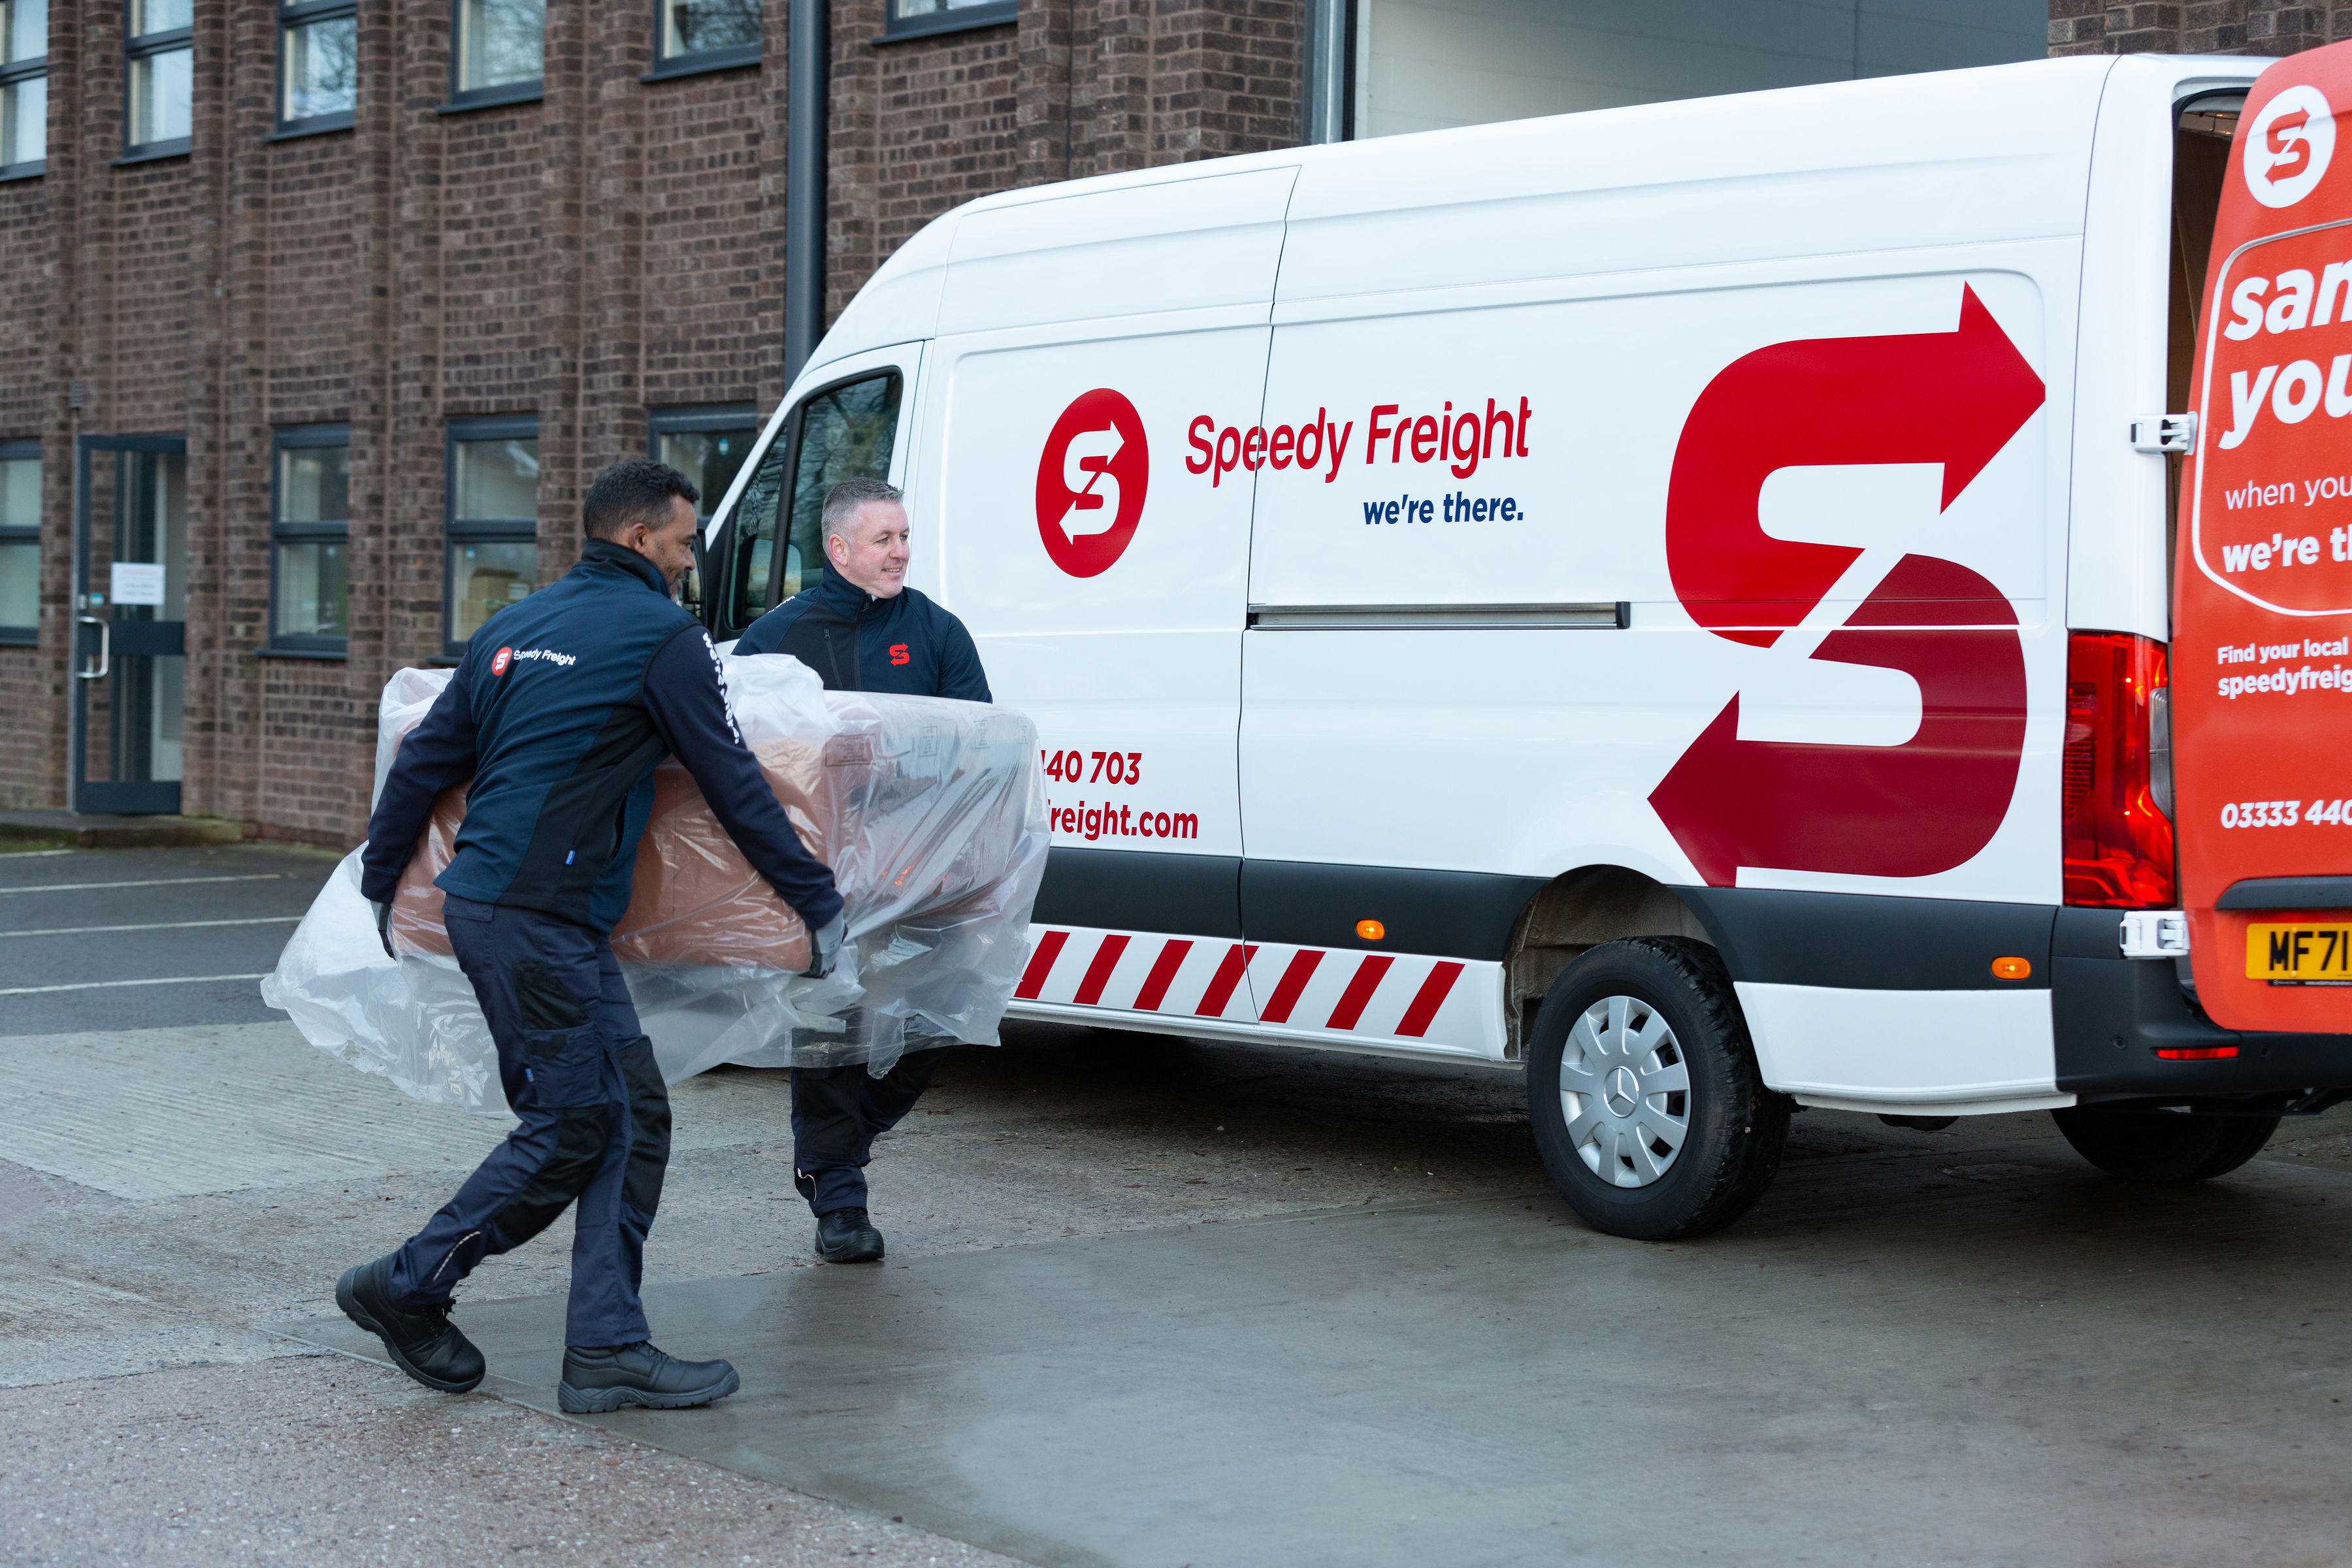 Images Speedy Freight London